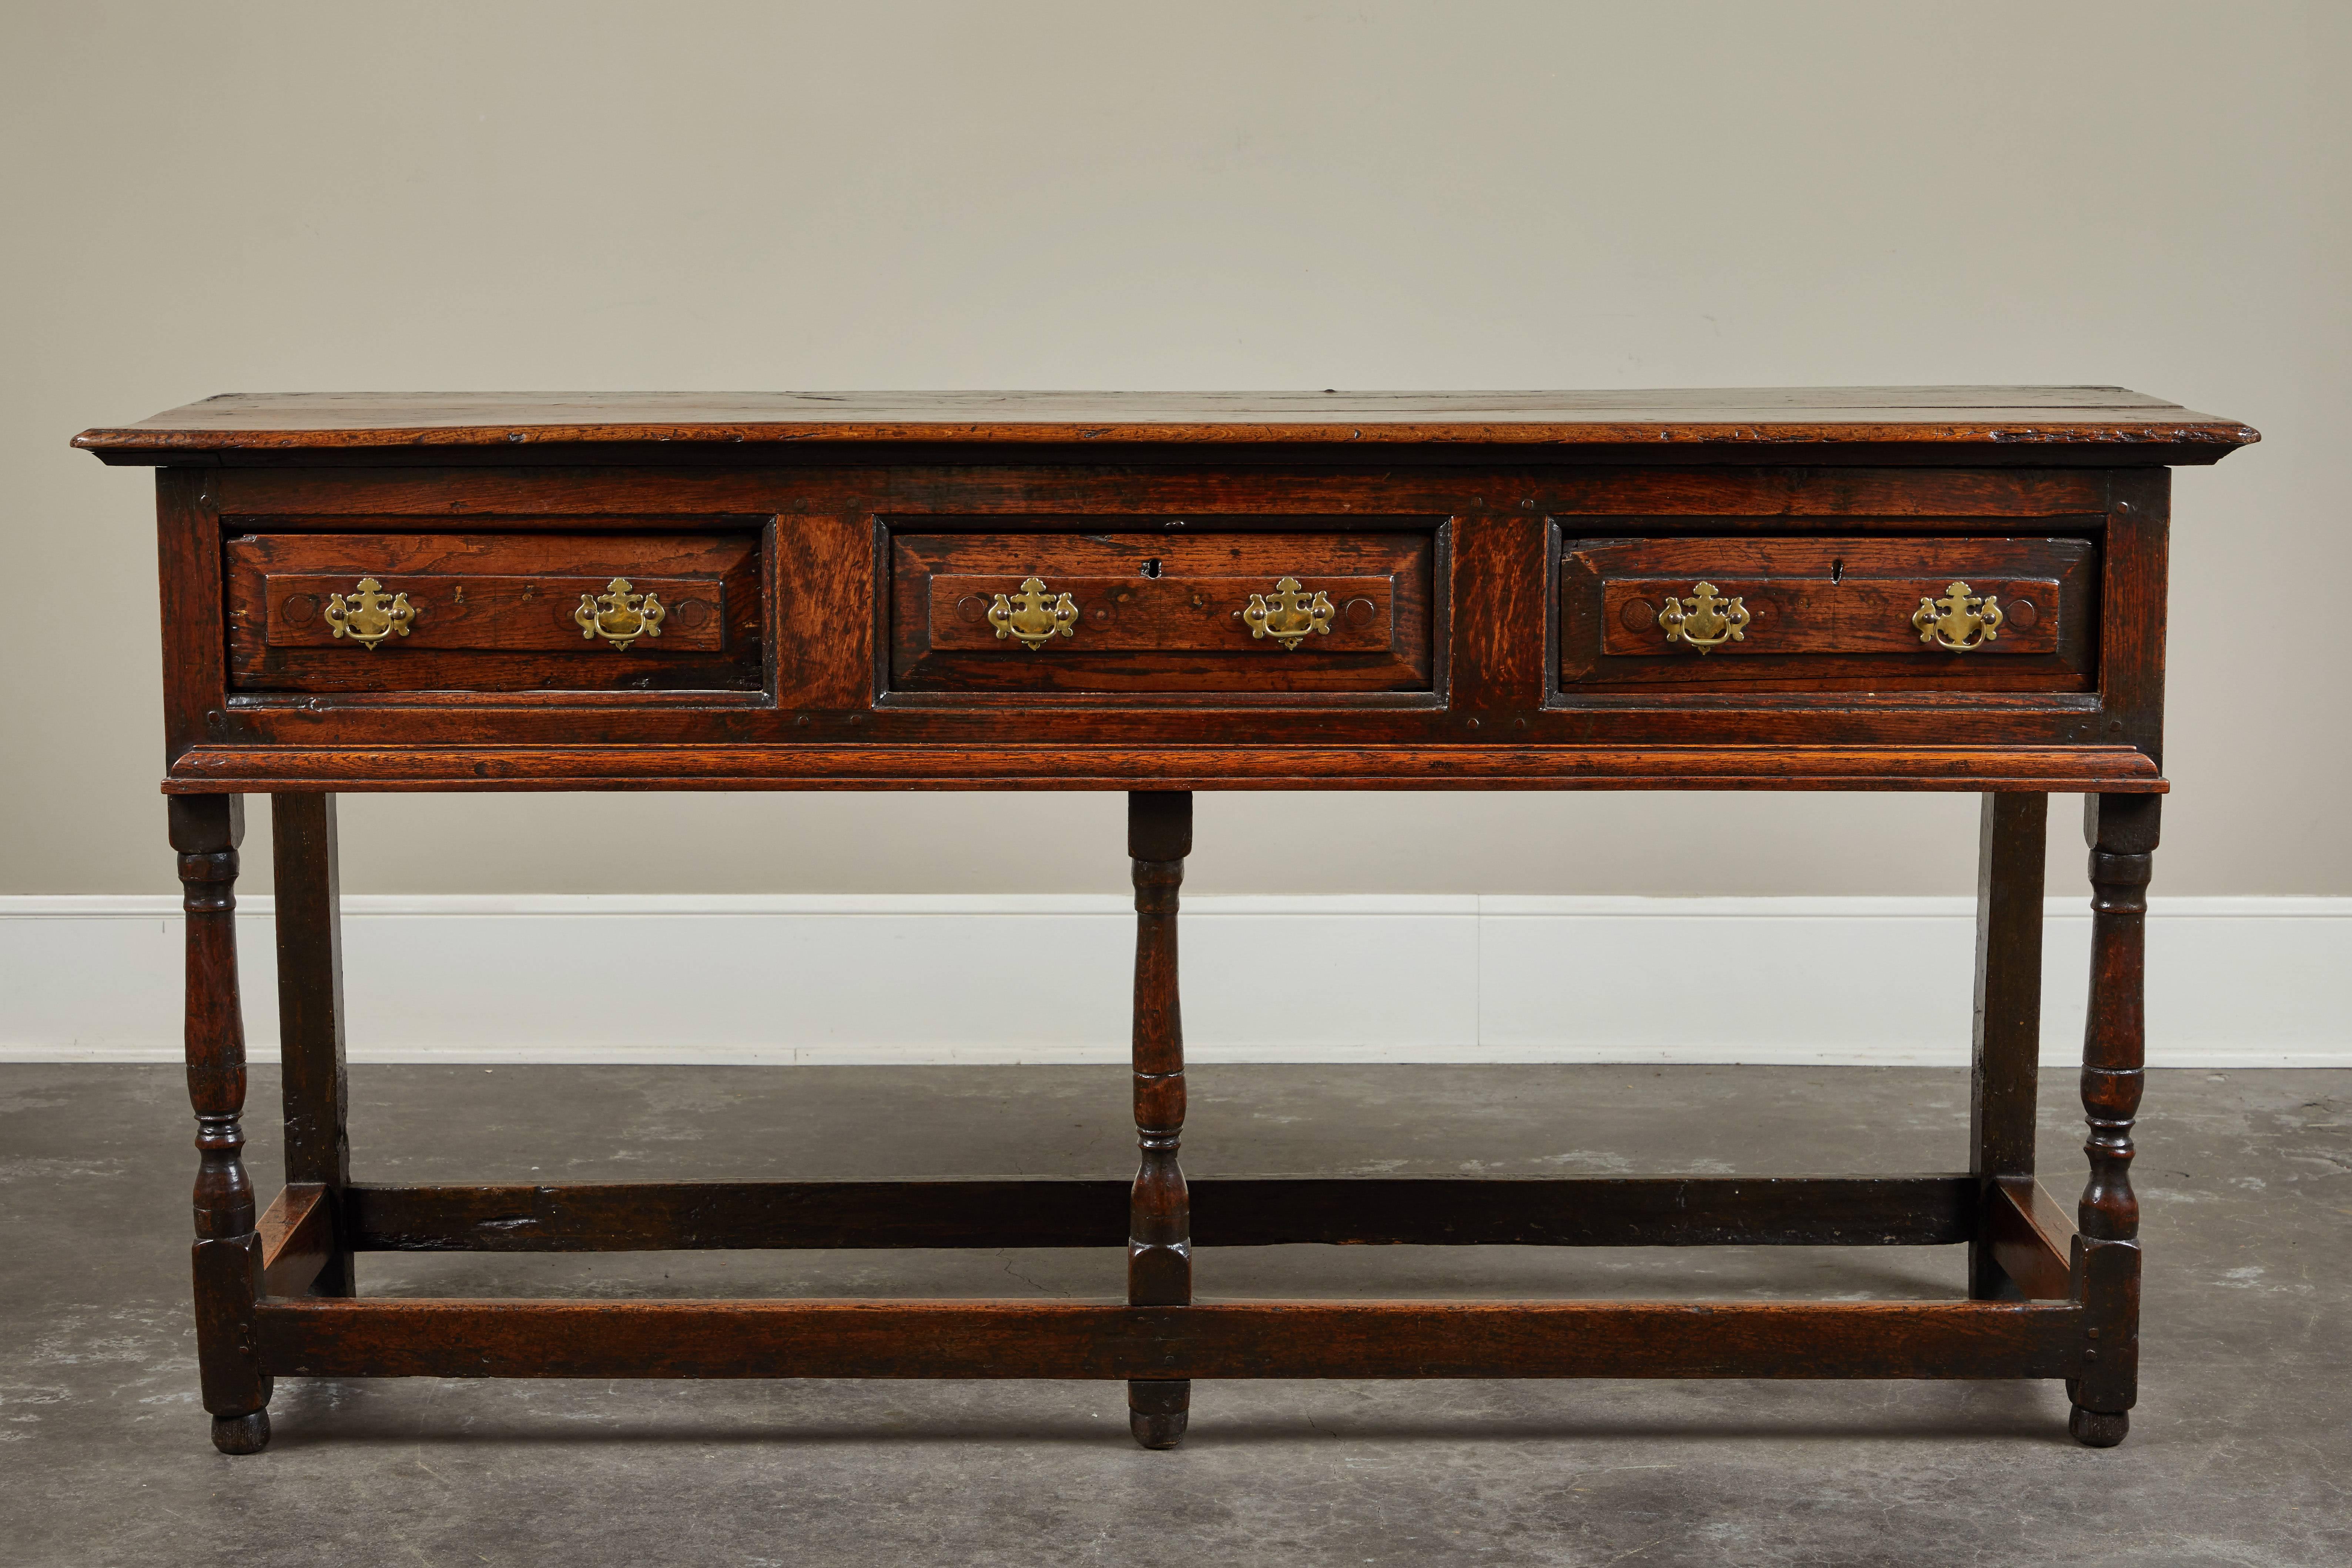 English oak Jacobean stretcher base sideboard with fielding to the drawers and molded drawer surrounds, circa 1650.